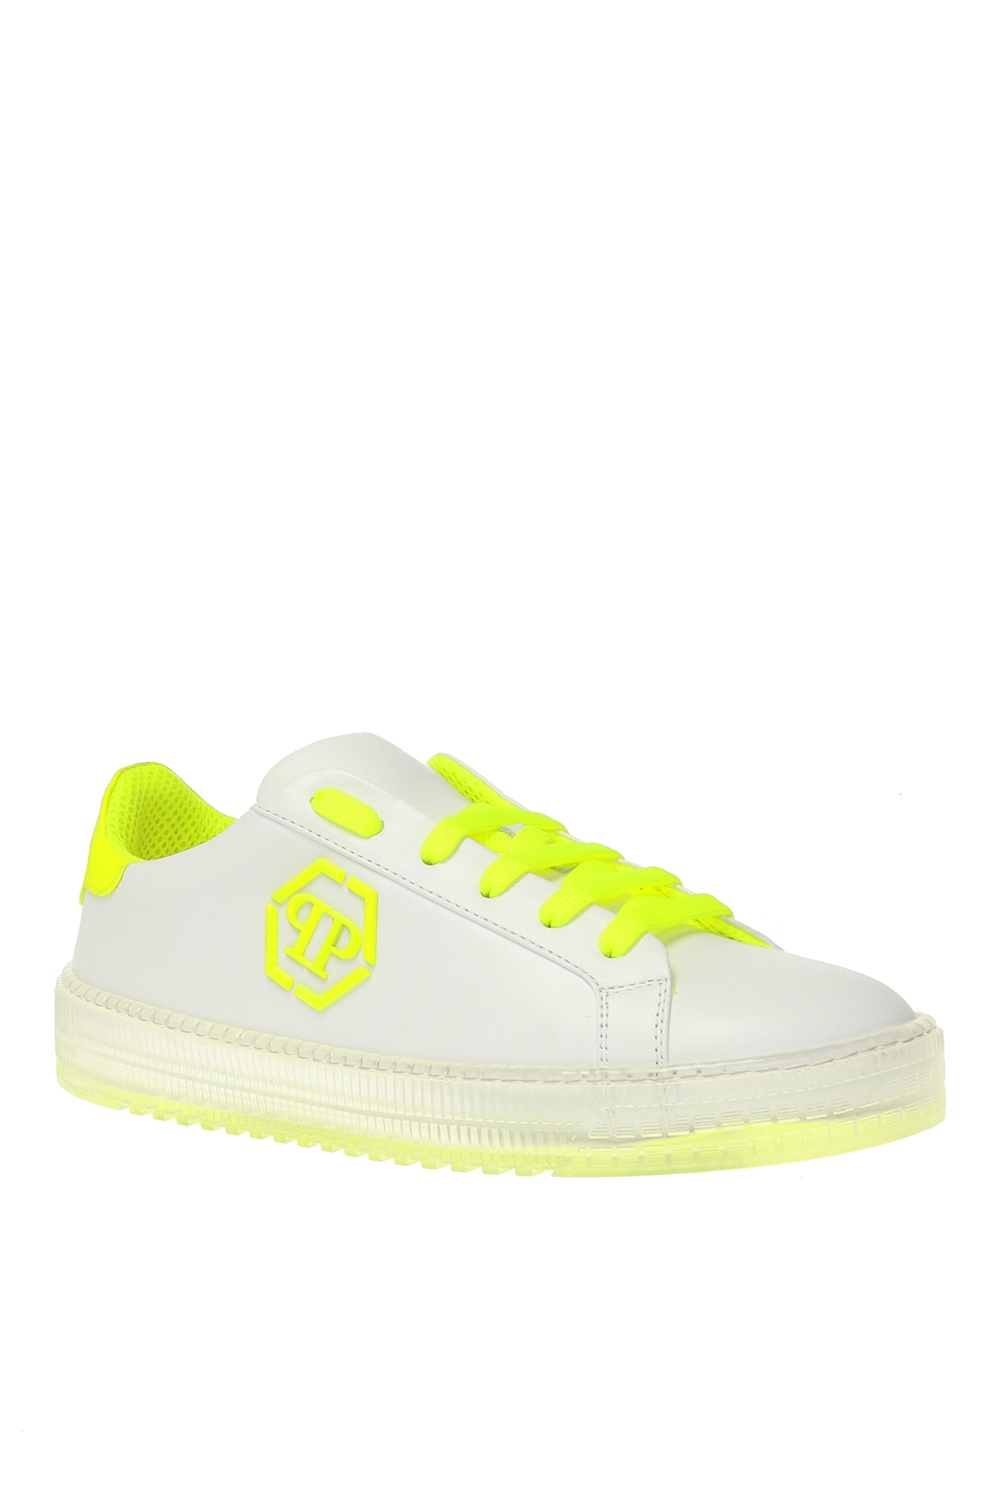 philipp plein shoes with screen